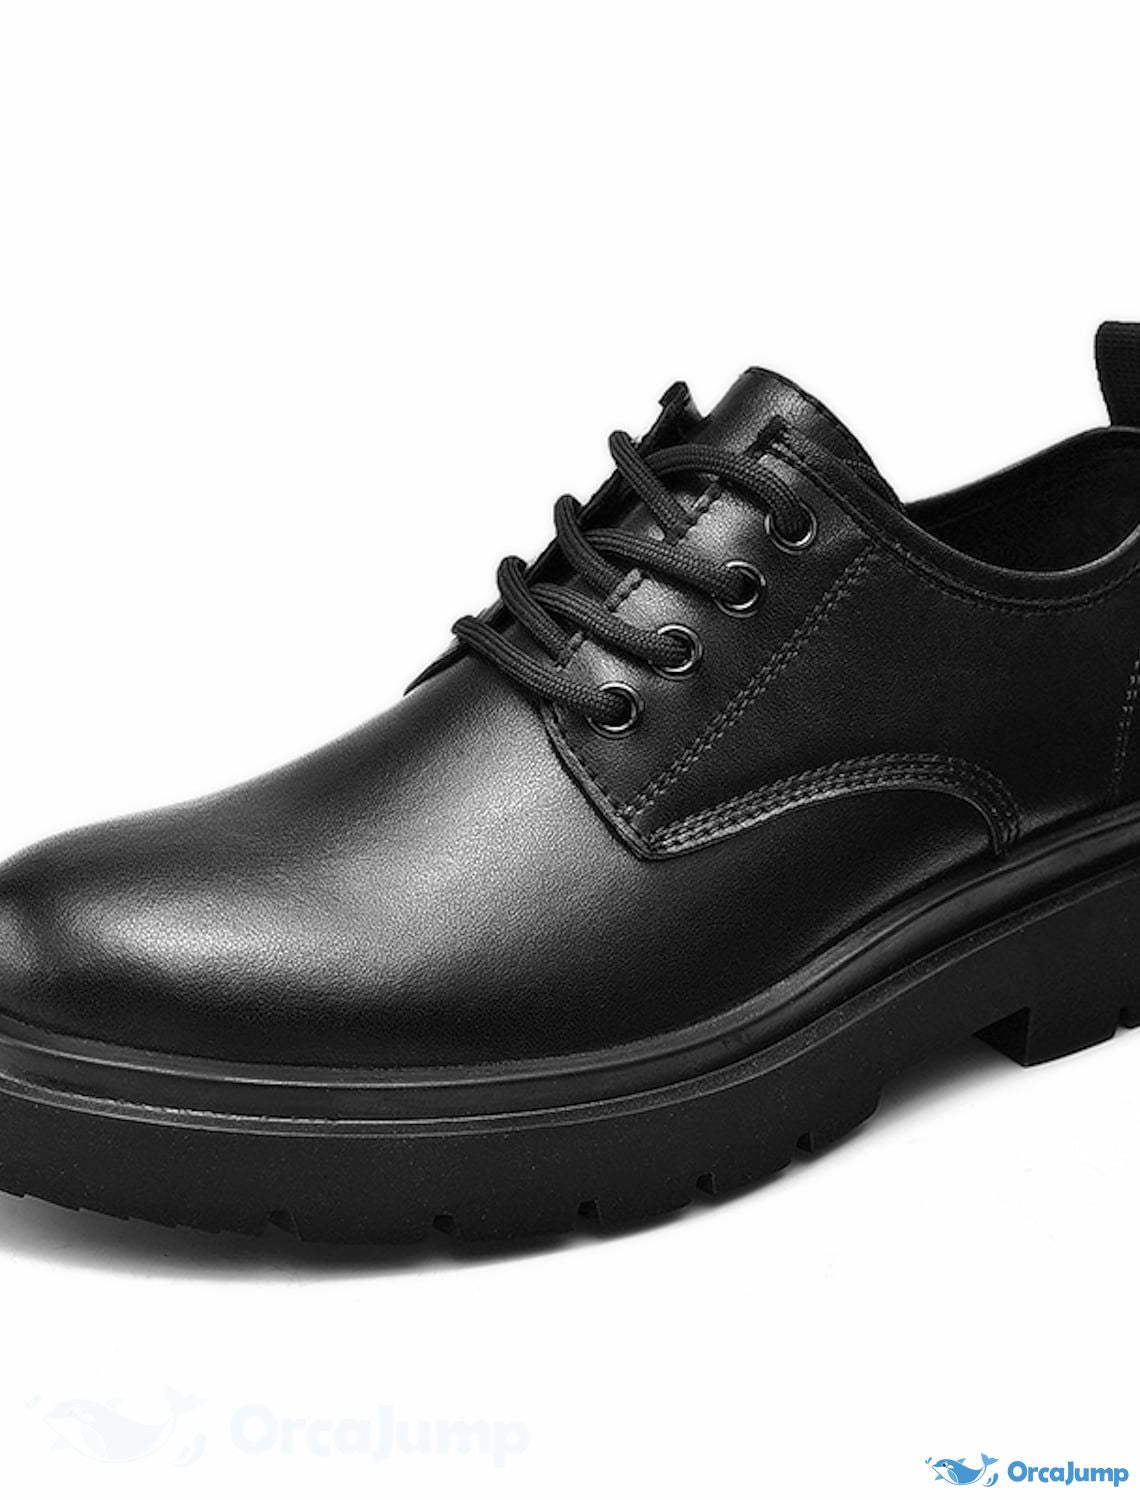 OrcaJump - Mens Oxford Formal Shoes Business Casual Daily Party & Even